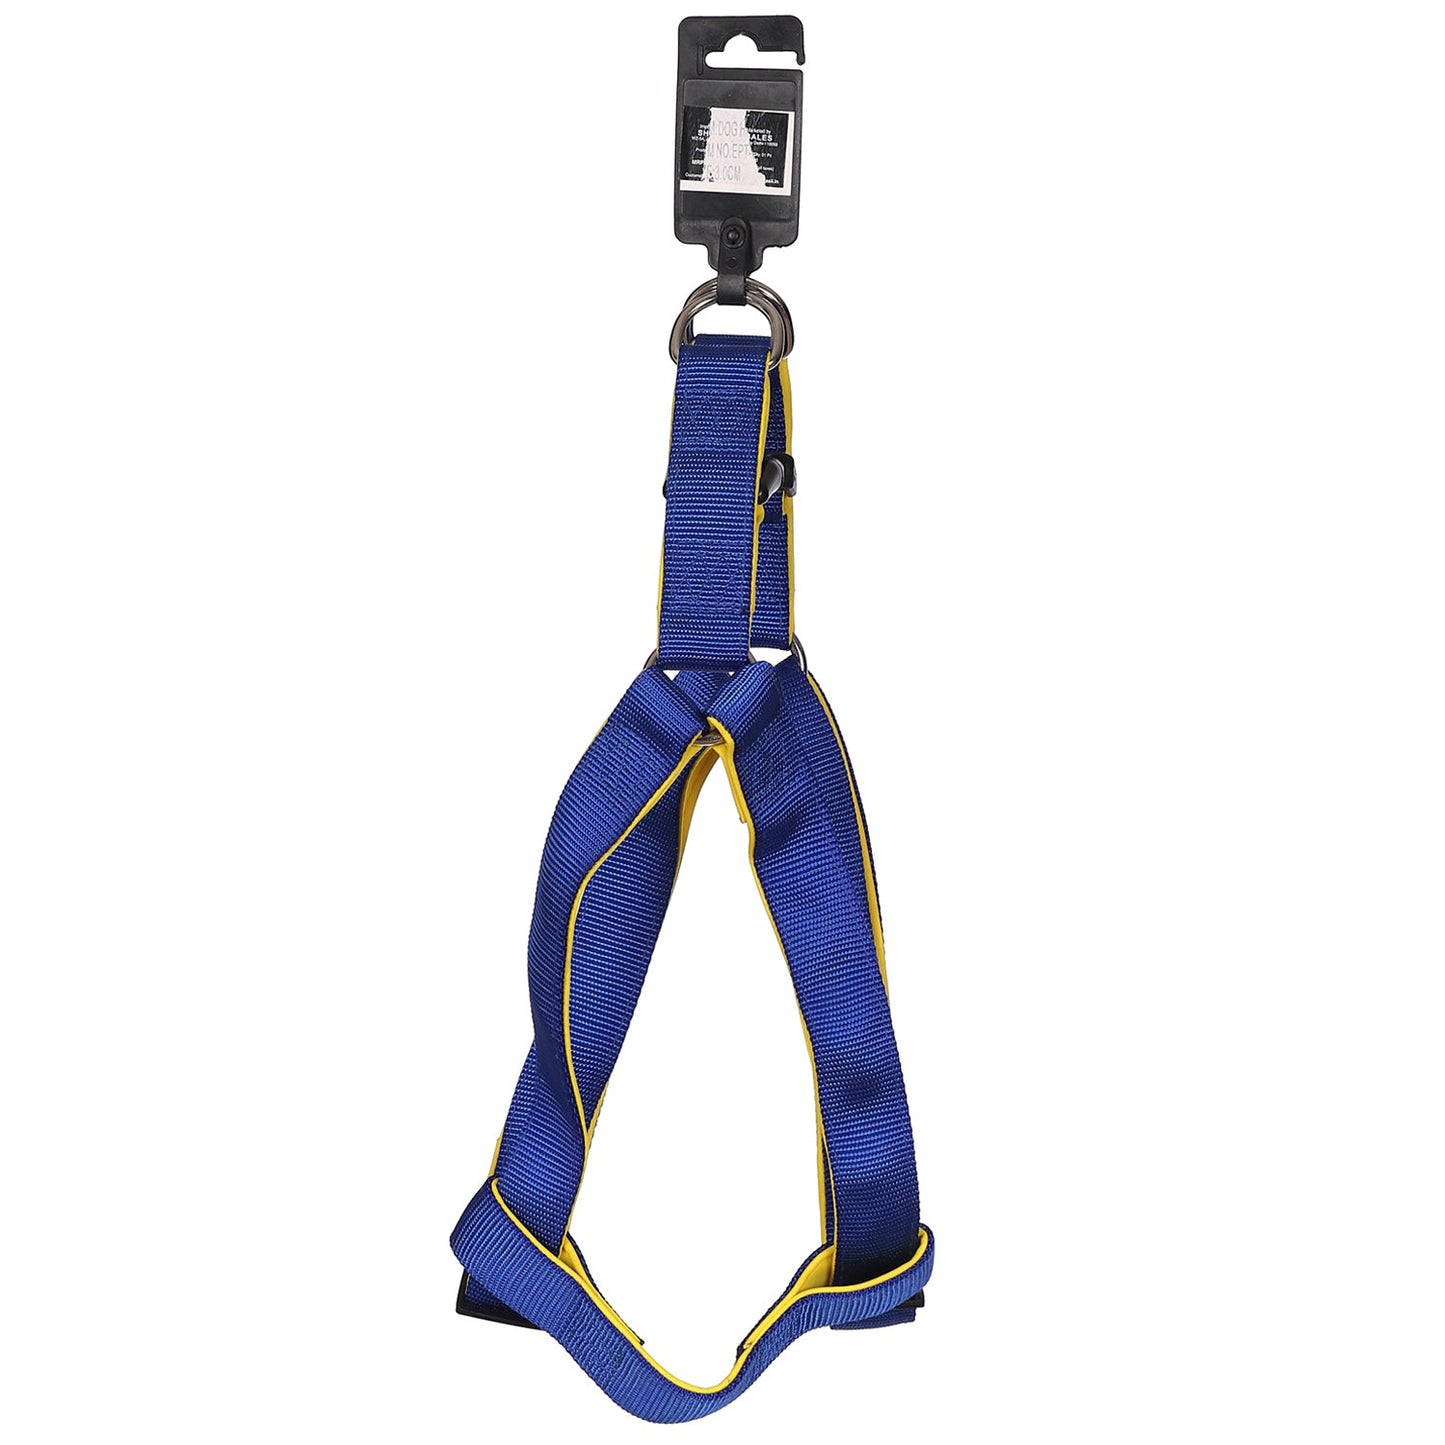 Basil Padded Adjustable Harness for Dogs & Puppies (Blue)